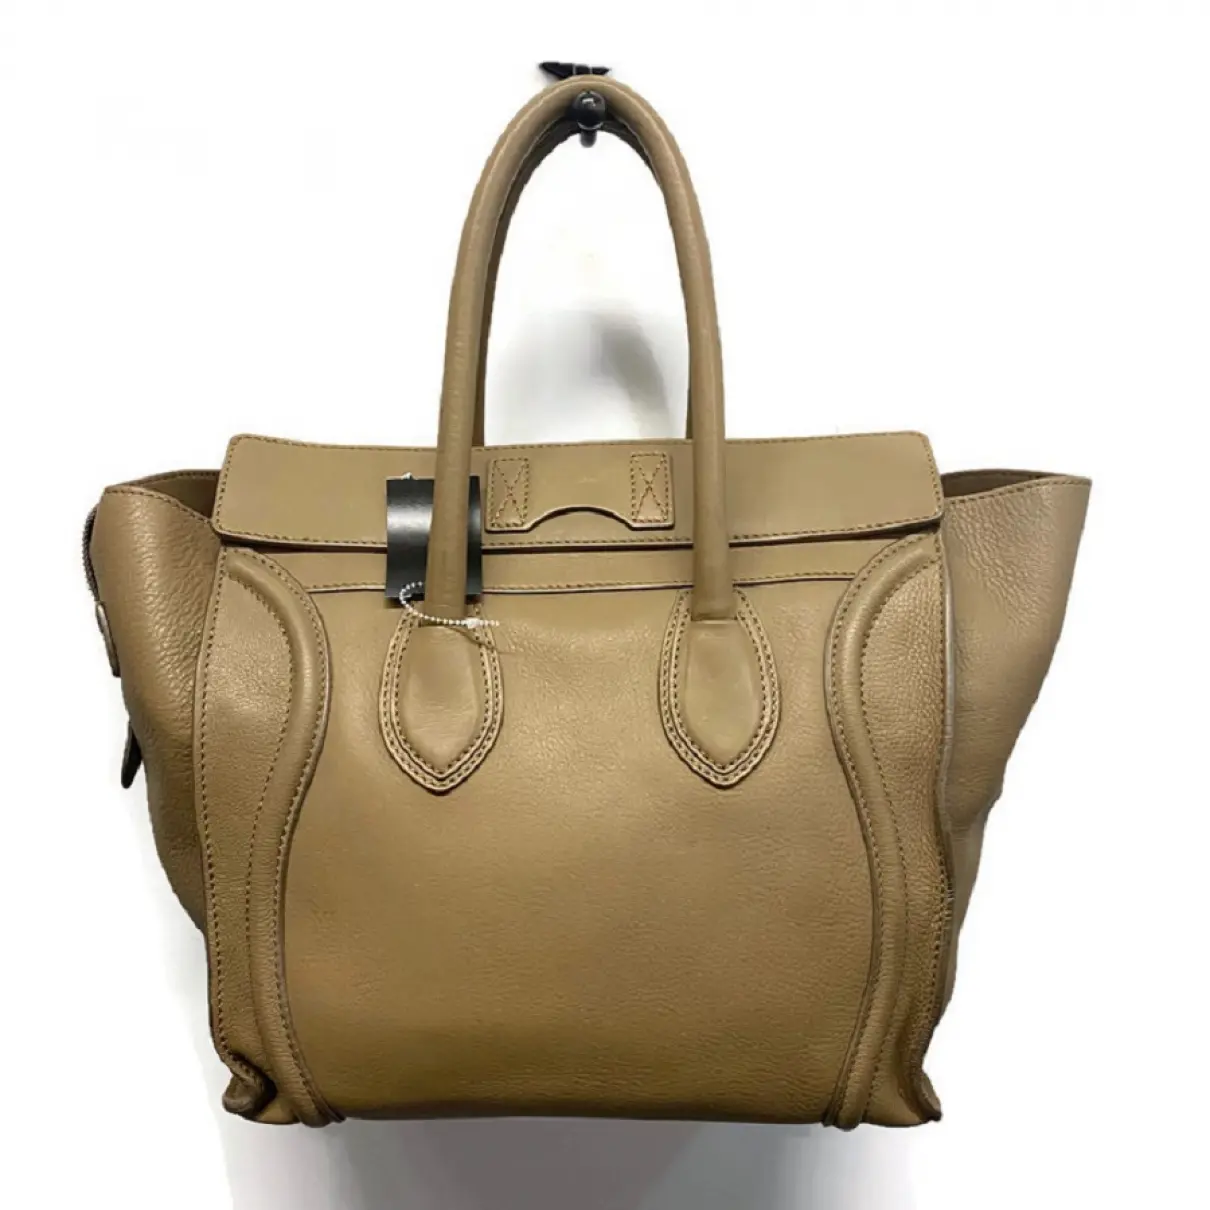 Buy Celine Luggage leather tote online